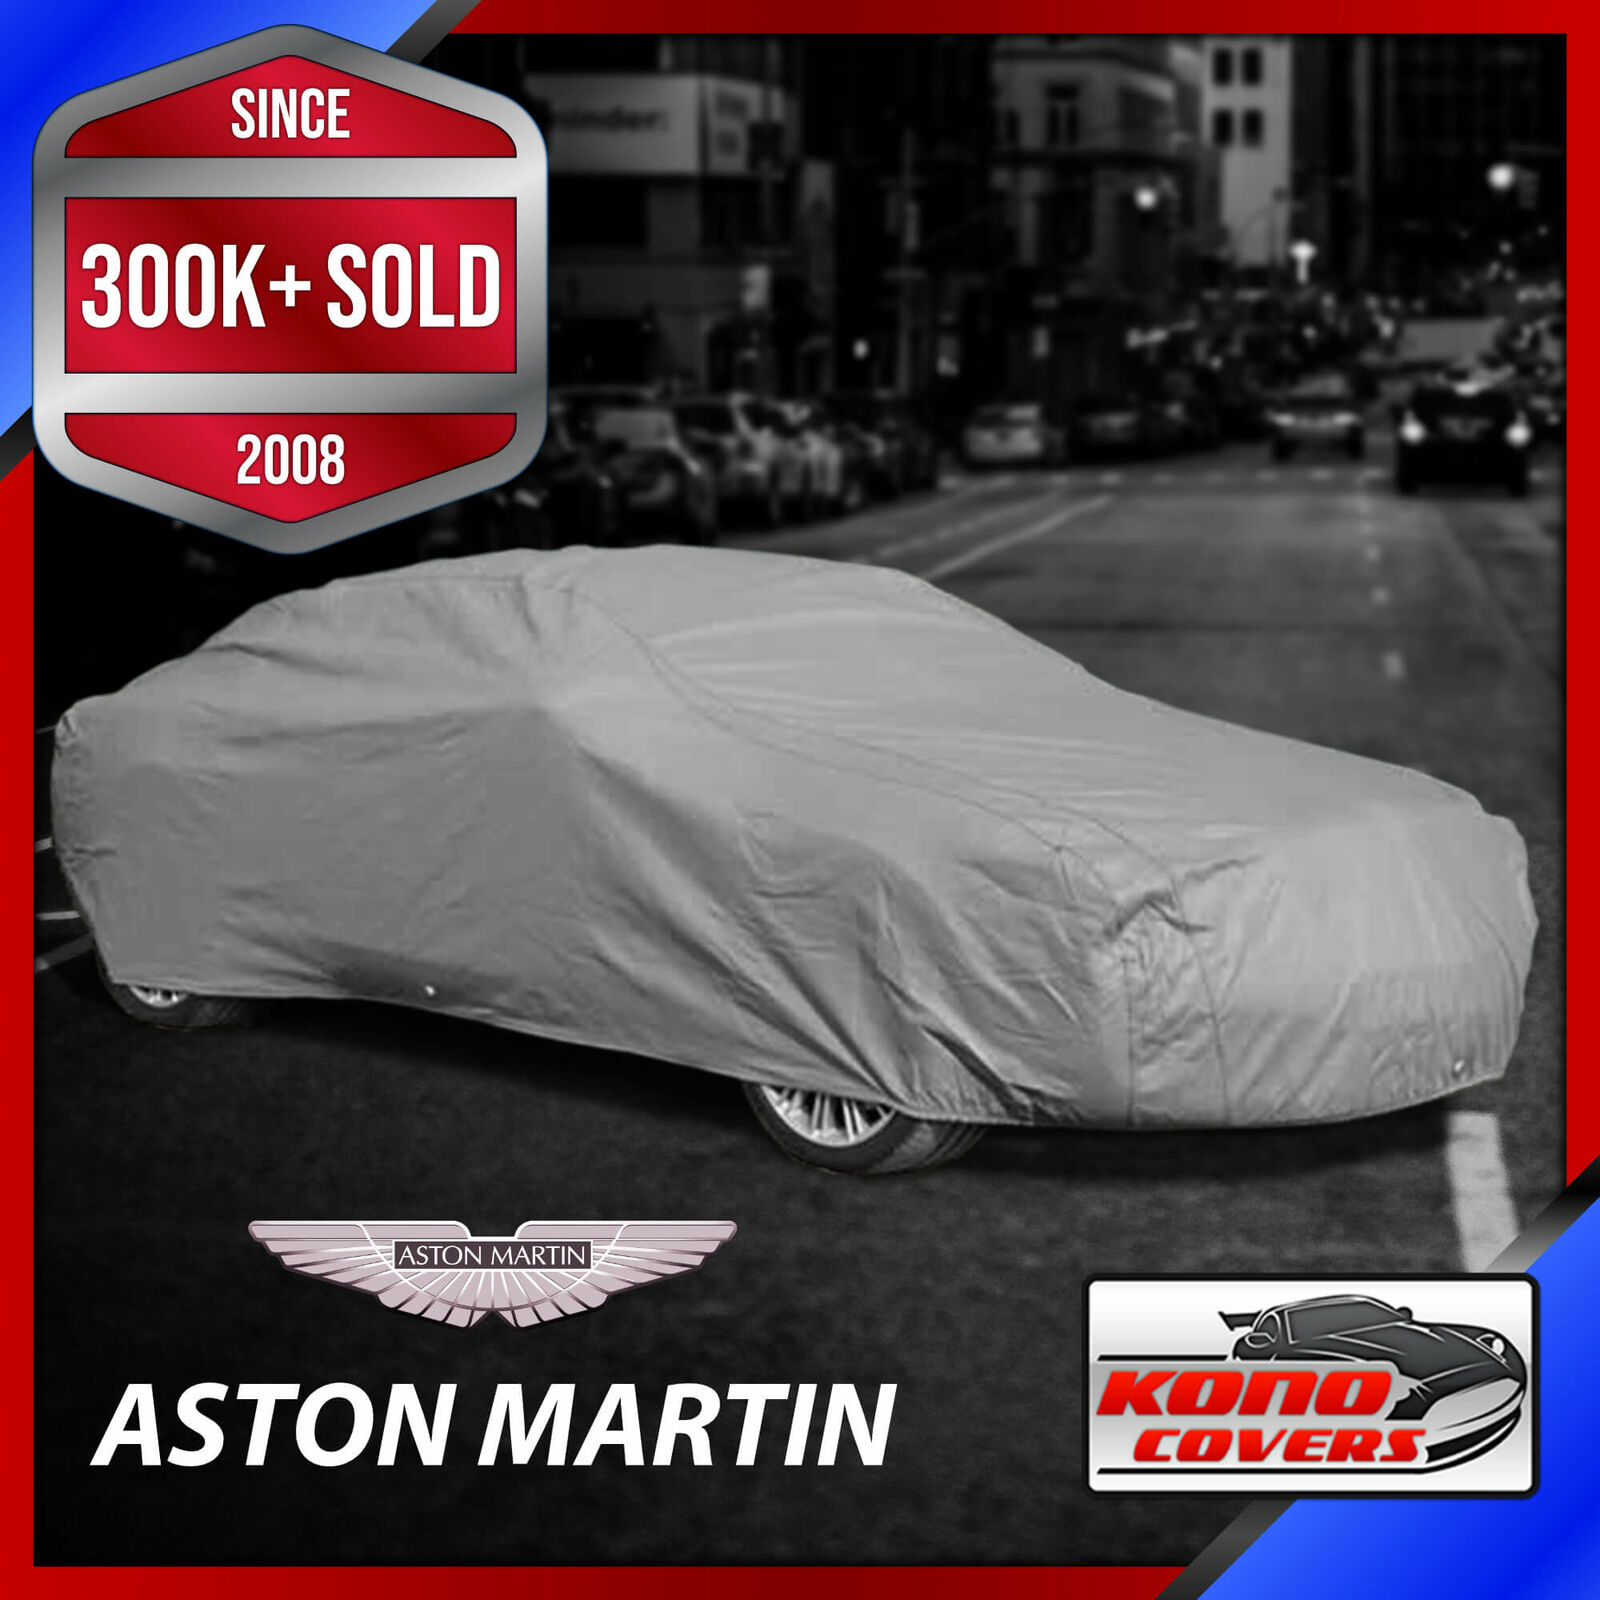 ASTON MARTIN [OUTDOOR] CAR COVER ☑️ 100% Waterproof ☑️ All-Weather ✔CUSTOM FIT